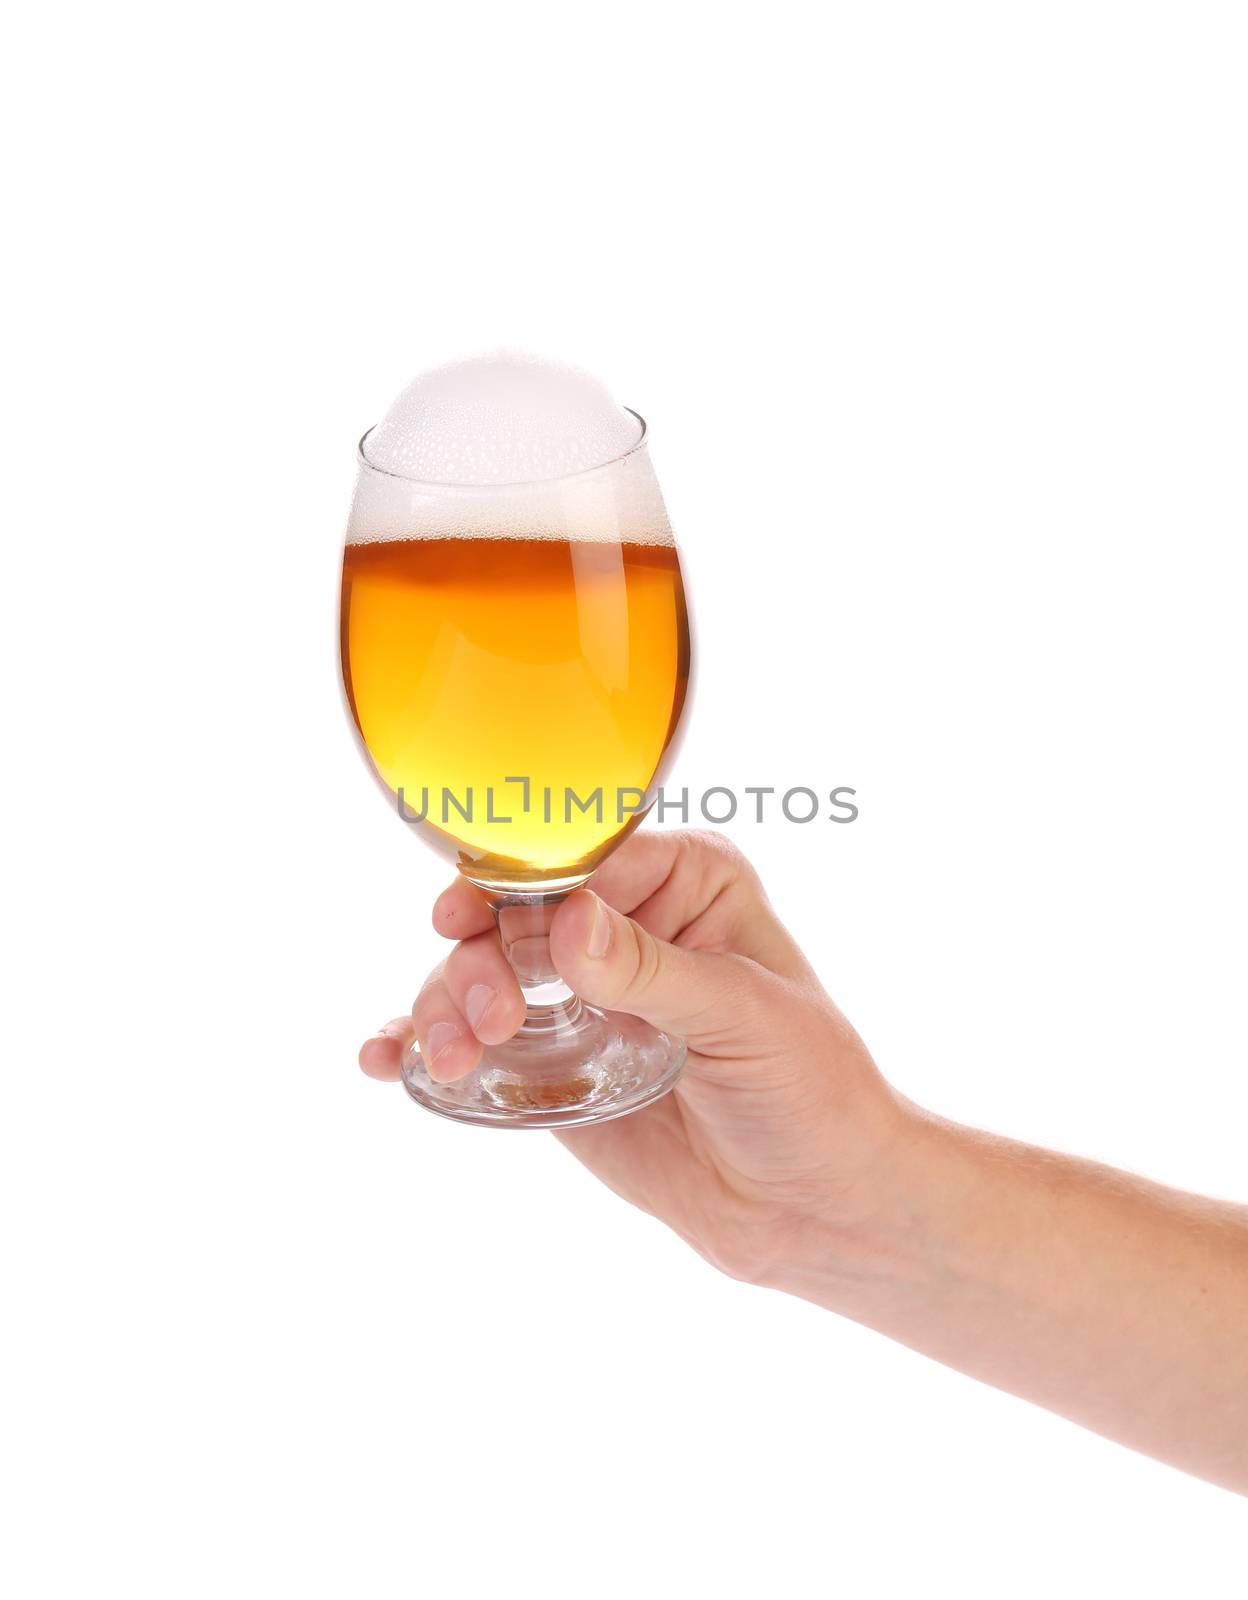 Hand with glass of beer. Isolated on a white background.